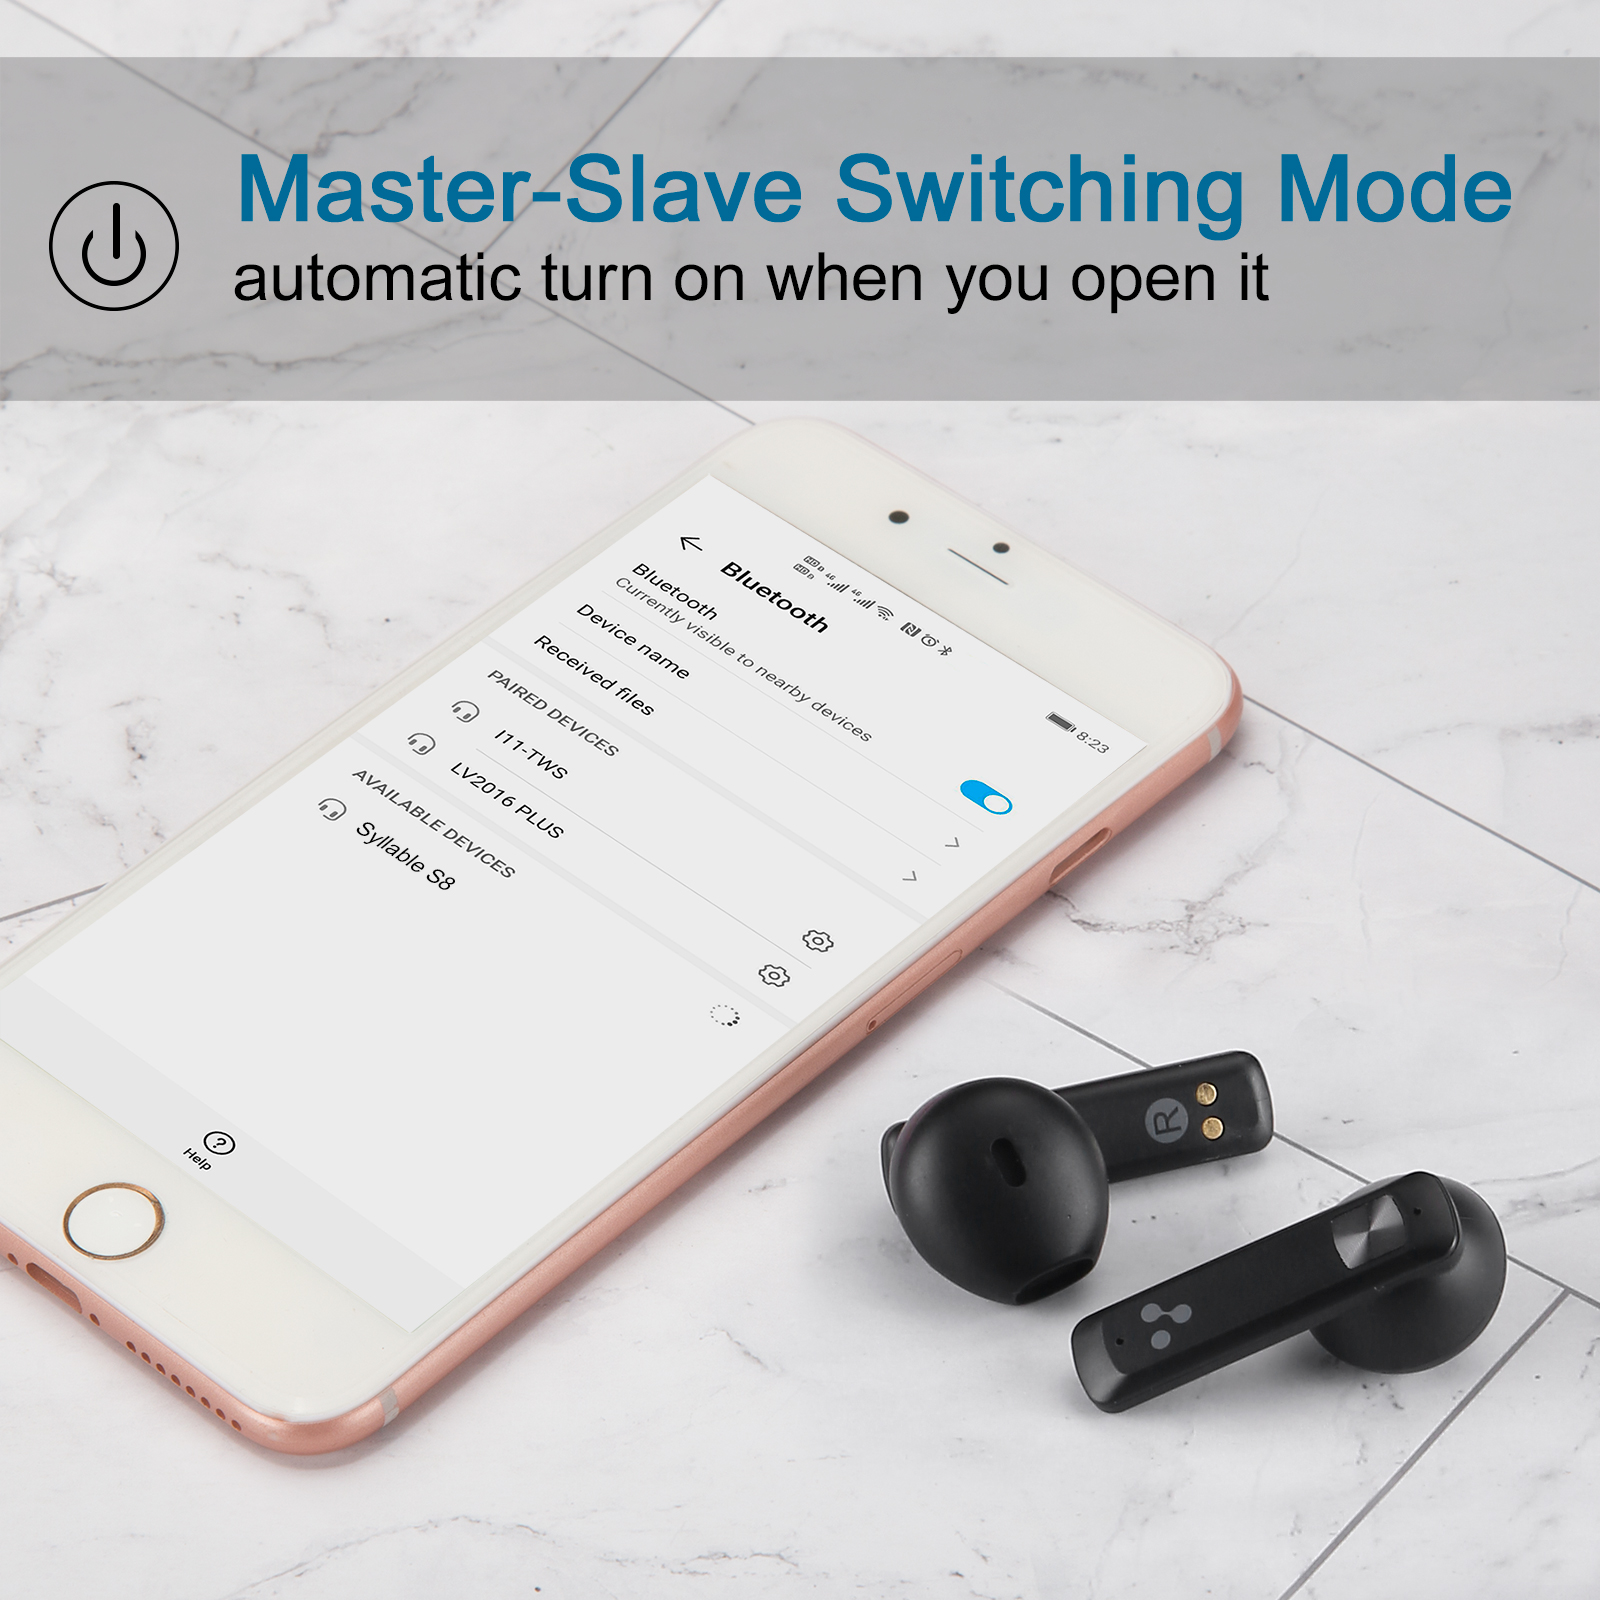 SYLLABLE-S8-TWS-bluetooth-Earphones-Master-Slave-Switching--13mm-Driver-Stereo-bass-Earbuds-Headphon-1877090-3